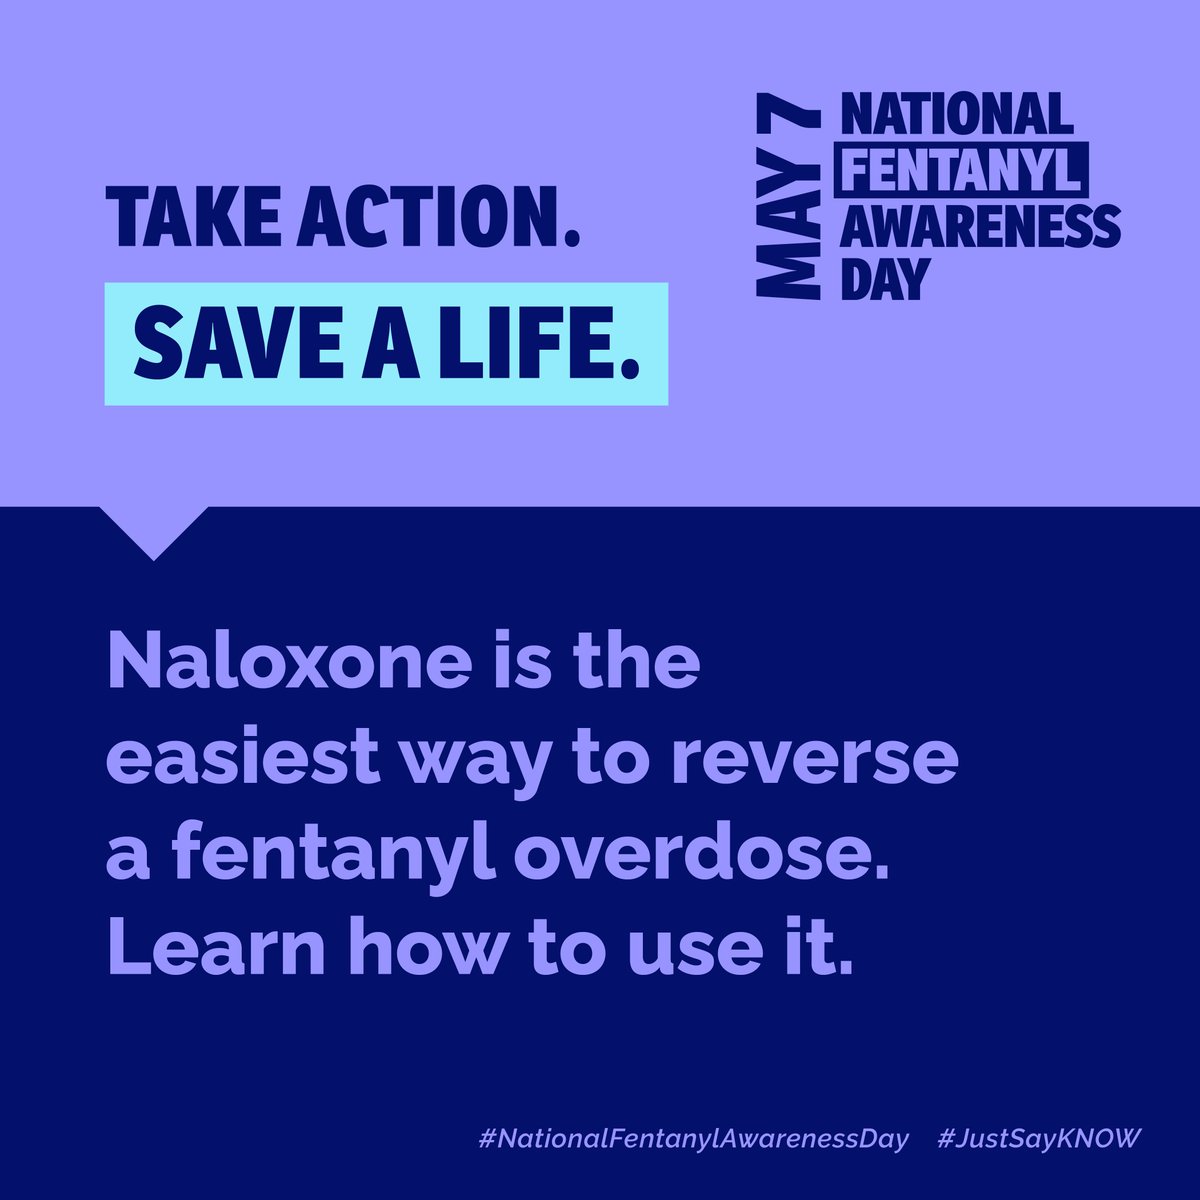 Today is National Fentanyl Awareness Day. Naloxone is the only way to reverse a fentanyl overdose. Carry it, learn how to recognize an opioid overdose, and how to respond. Learn more at fentanylawarenessday.org/recognize-and-… #NationalFentanylAwarenessDay #HealthierNJ